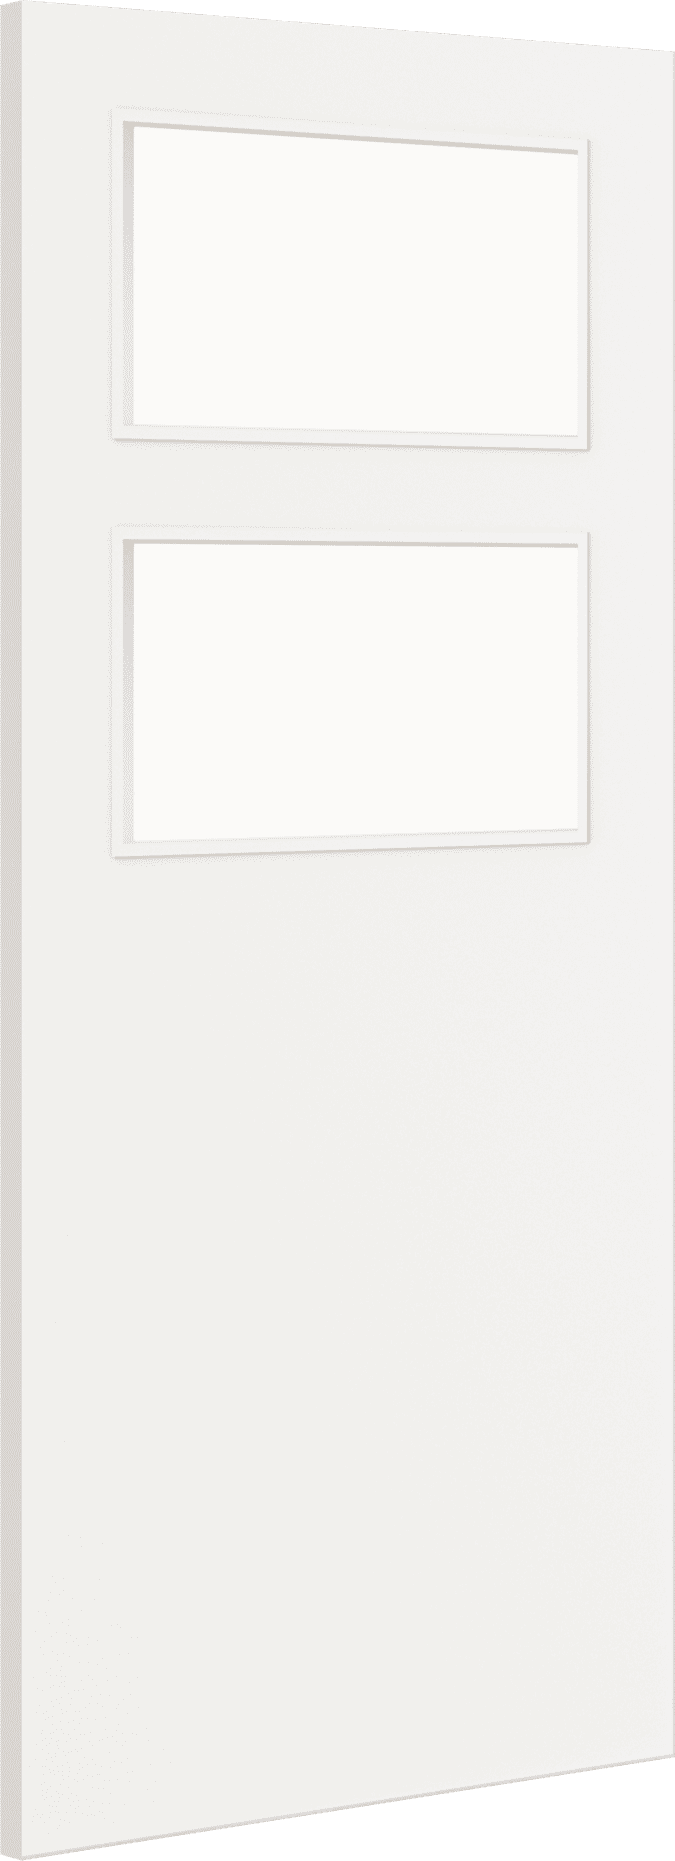 2040mm x 826mm x 44mm Architectural Paint Grade White 02 Frosted Glazed Fire Door Blank